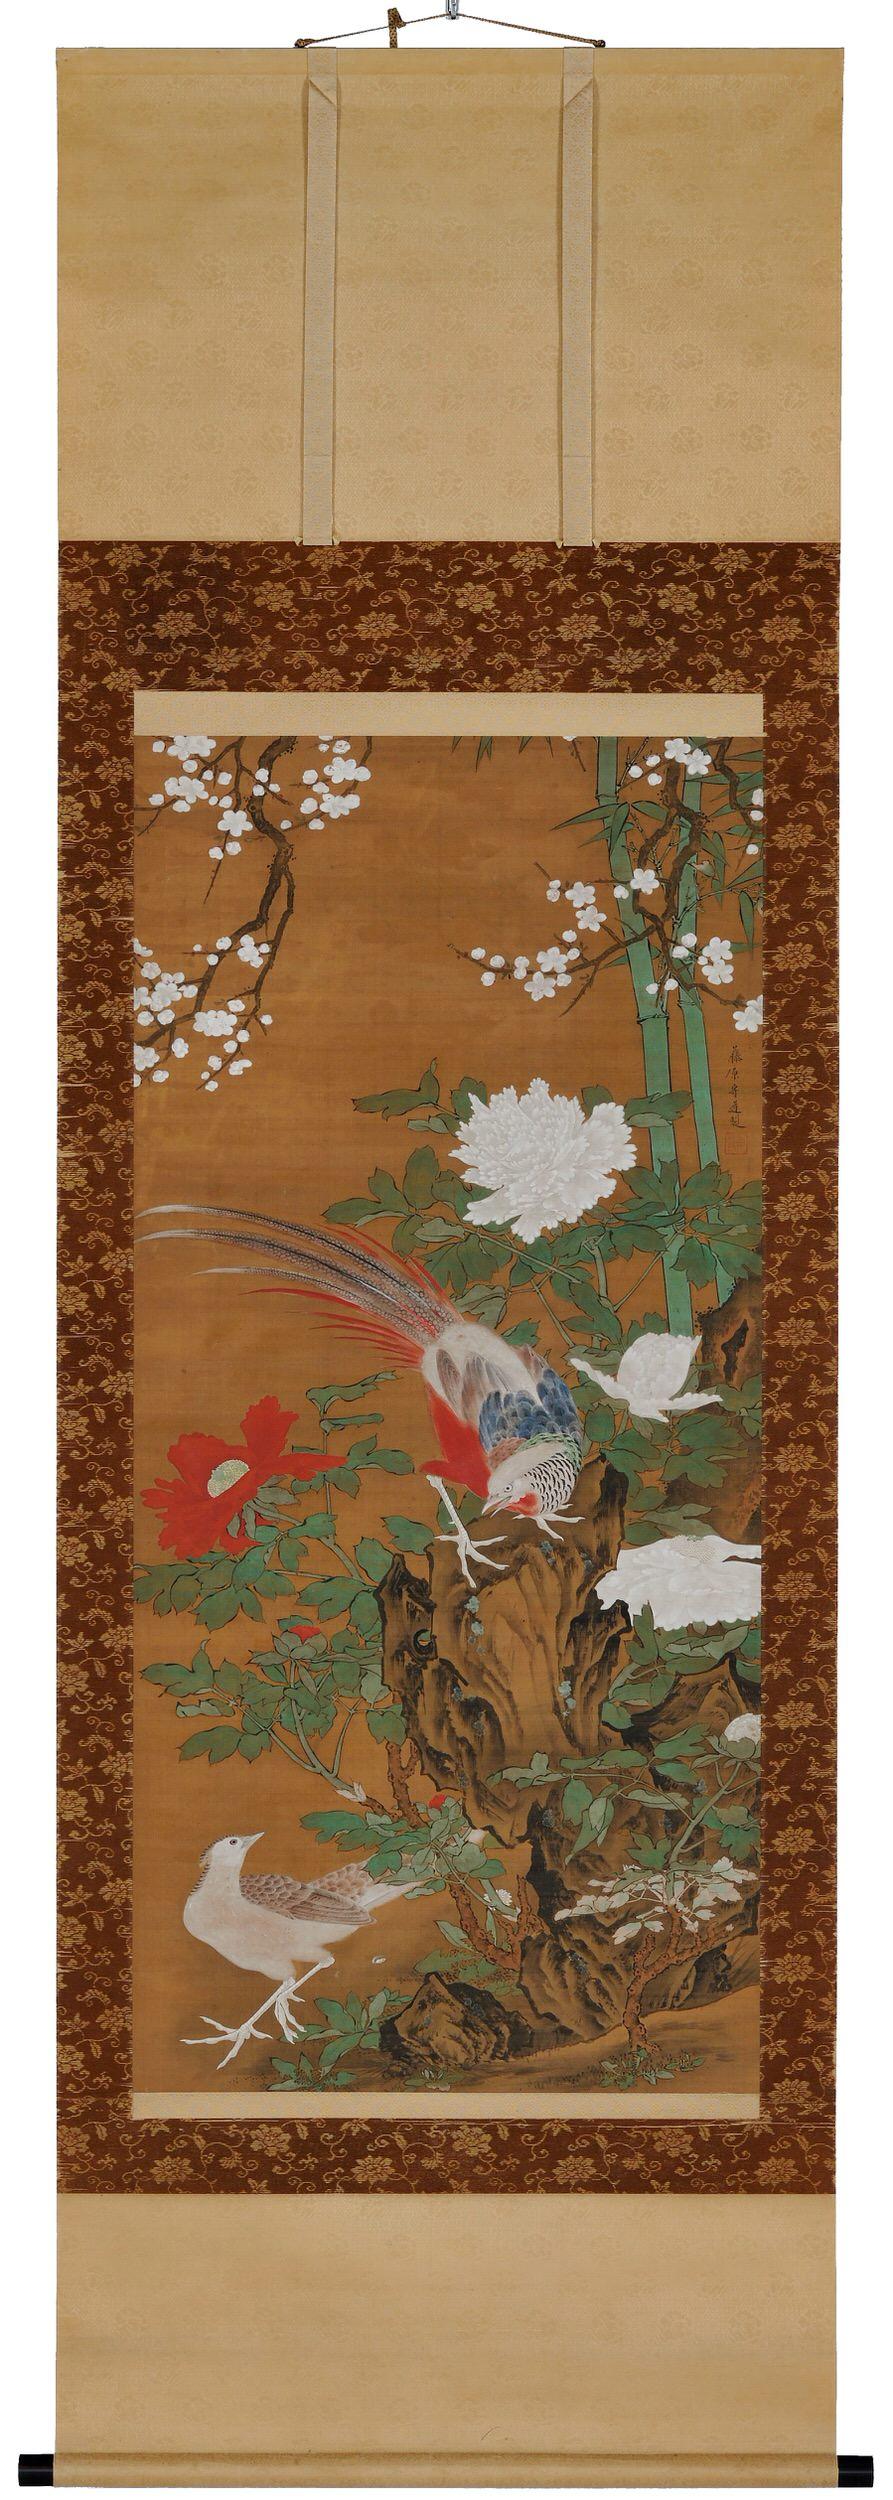 ‘Golden Pheasants under Spring Blossoms’

Kano Tanshin Morimichi 1785-1835 

Edo period, circa 1815

Hanging scroll. Ink, go fun and mineral pigments on silk.

An early 19th century Japanese scroll painting depicting a pair of Chinese